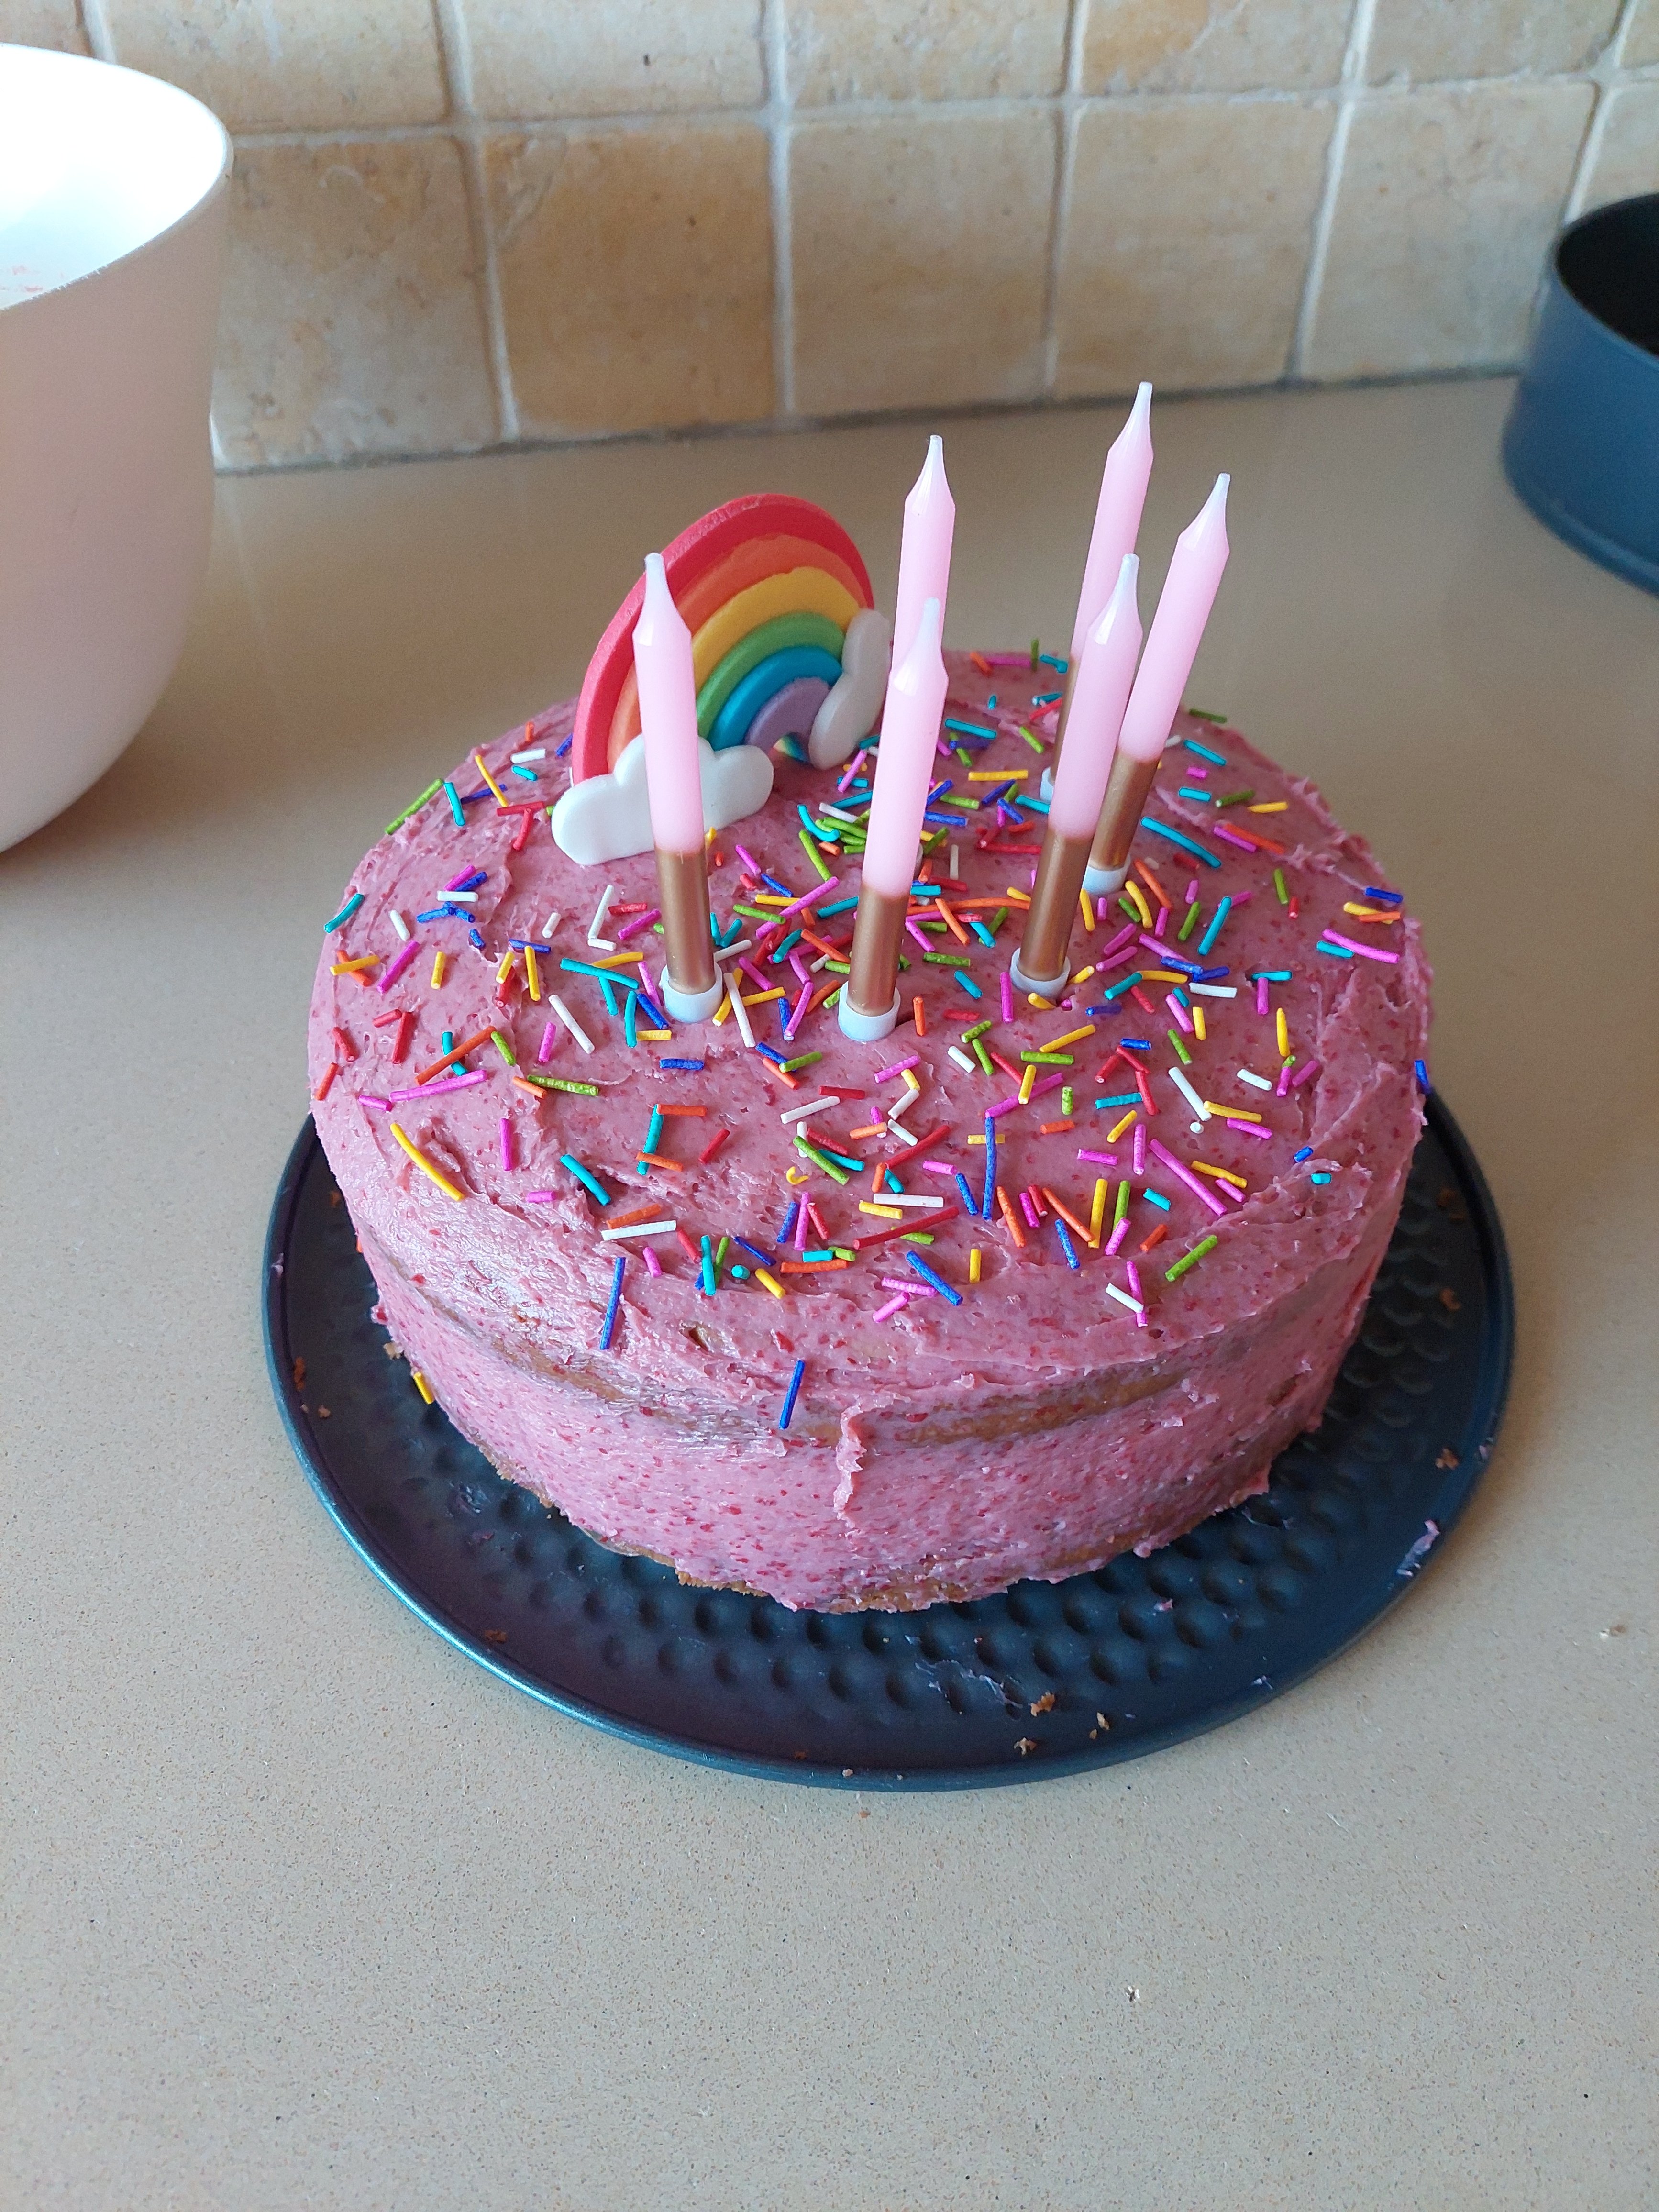 a picture of the full cake with 6 candles and a fondant rainbow decoration